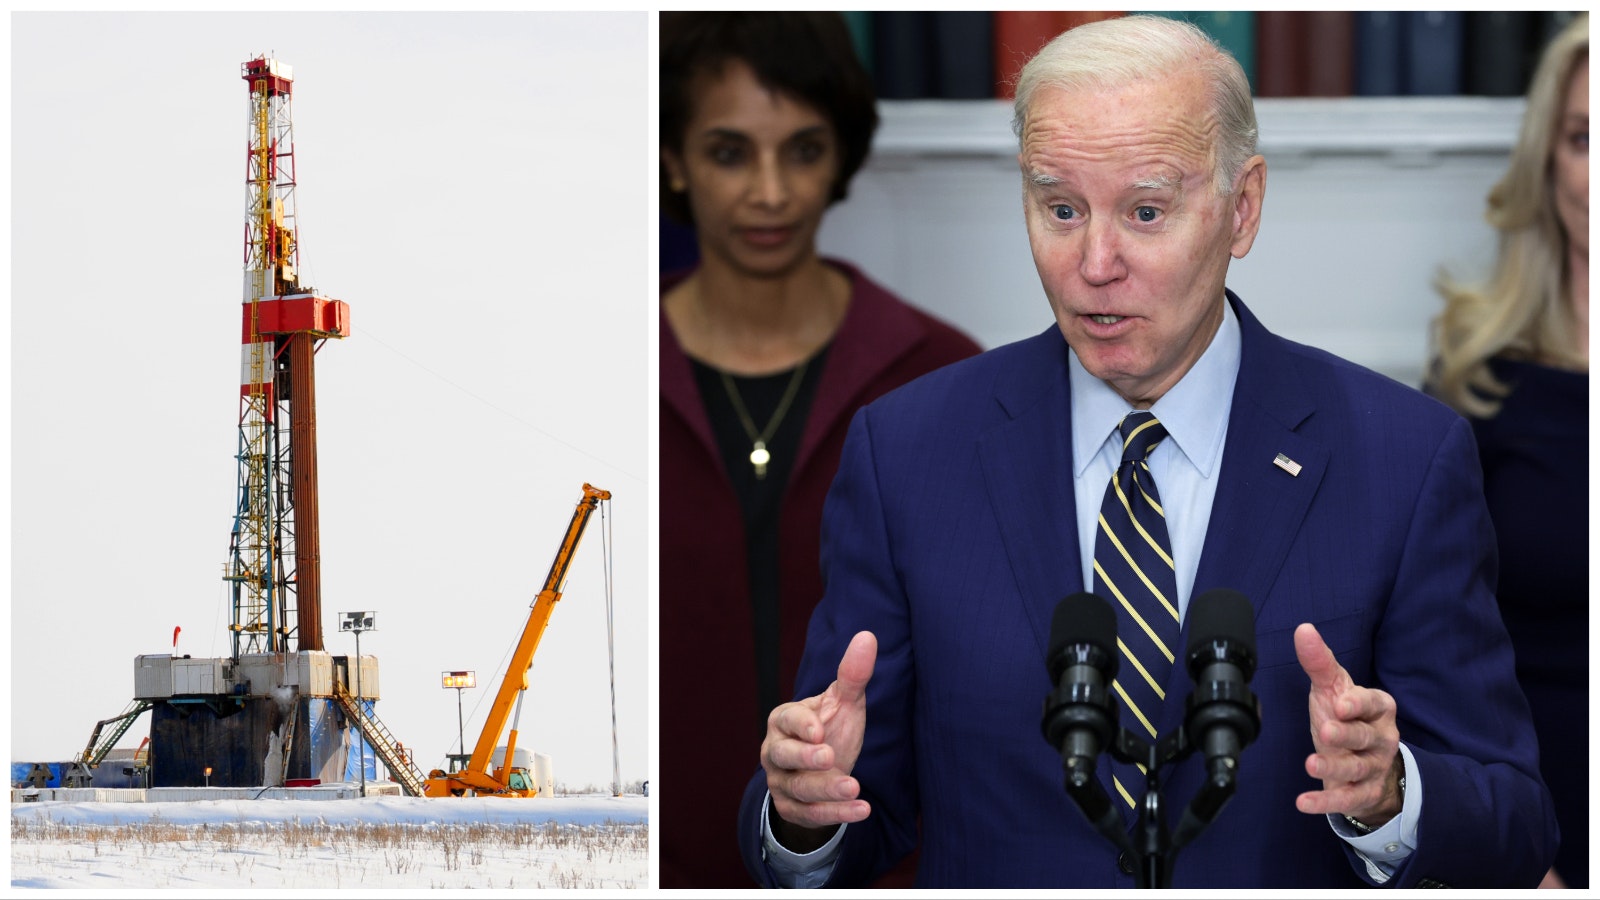 Oil rig and biden 3 15 23